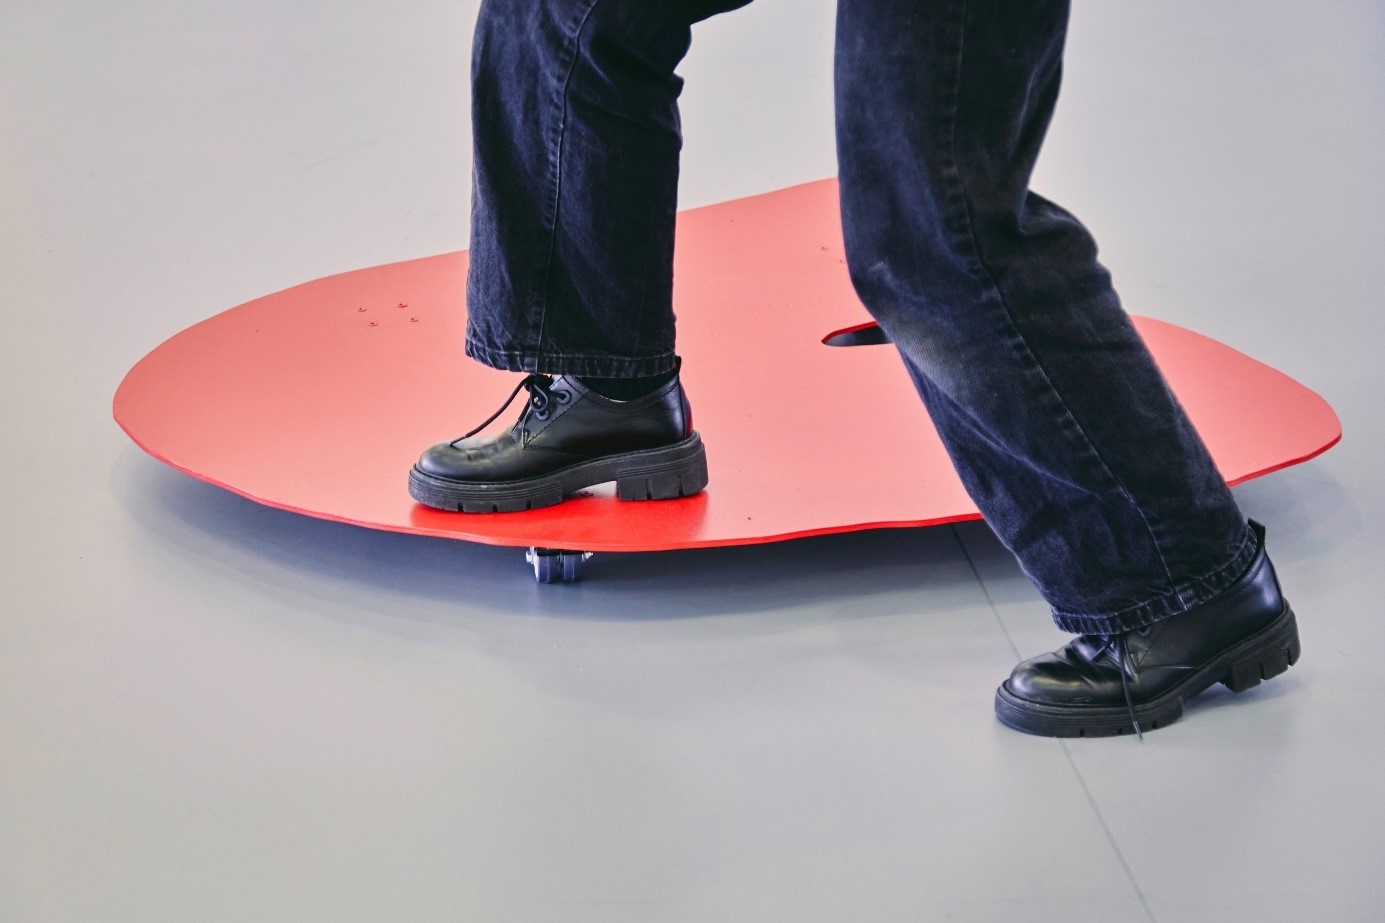 A man has one foot on a red rolling board